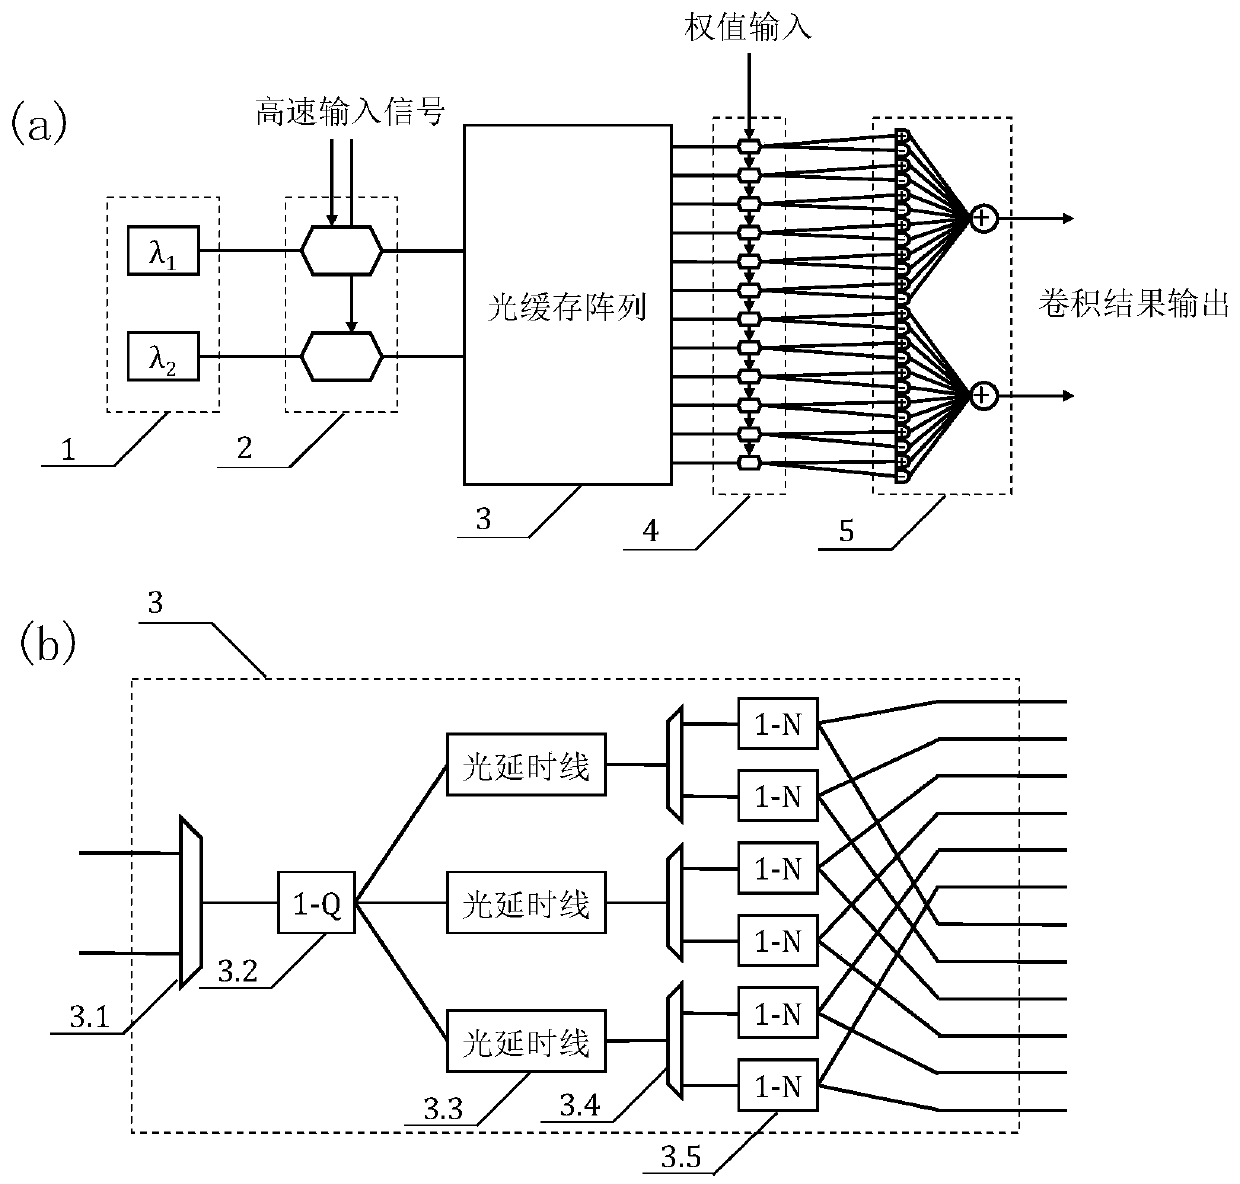 Photonic convolutional neural network architecture based on optical delay line caching